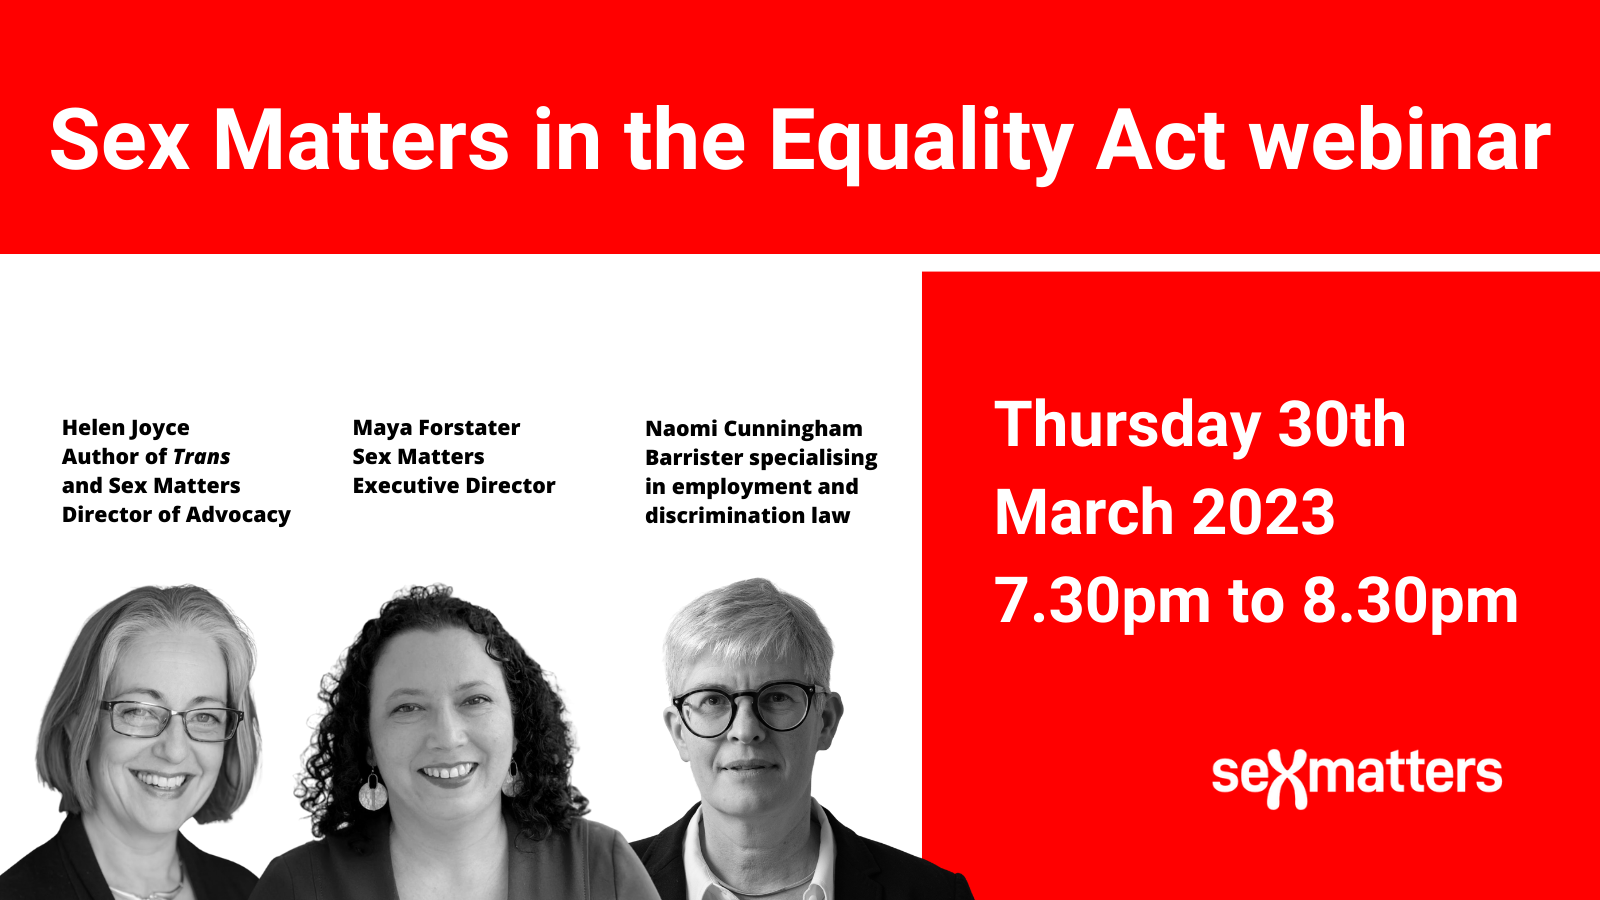 Sex Matters in the Equality Act webinar: Thursday 30th March 2023 7.30pm to 8.30pm